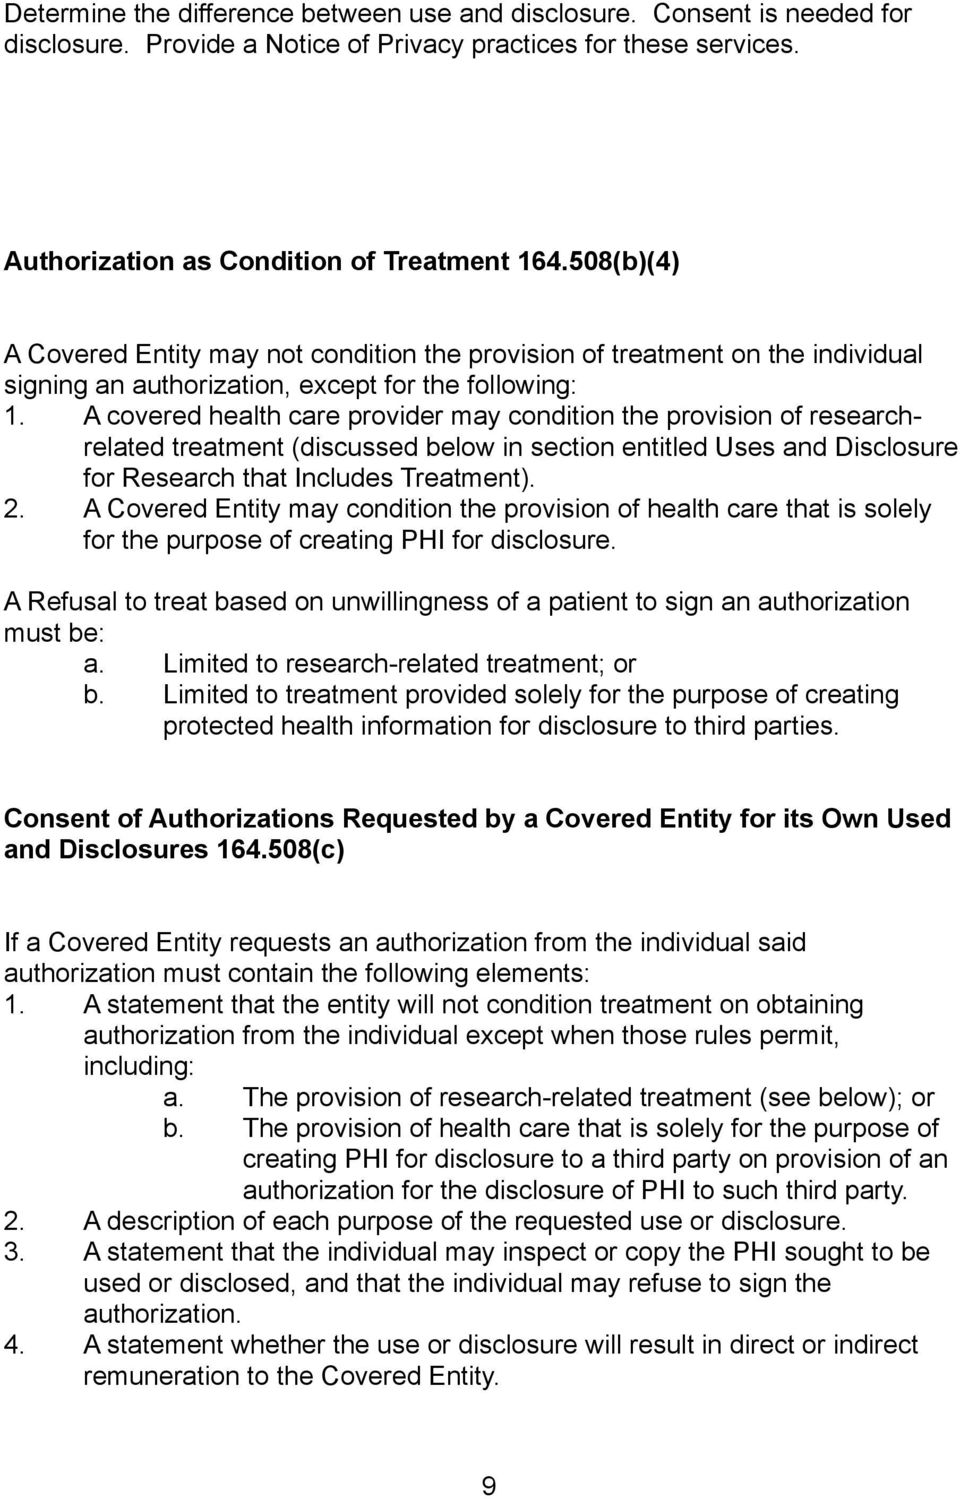 A covered health care provider may condition the provision of researchrelated treatment (discussed below in section entitled Uses and Disclosure for Research that Includes Treatment). 2.